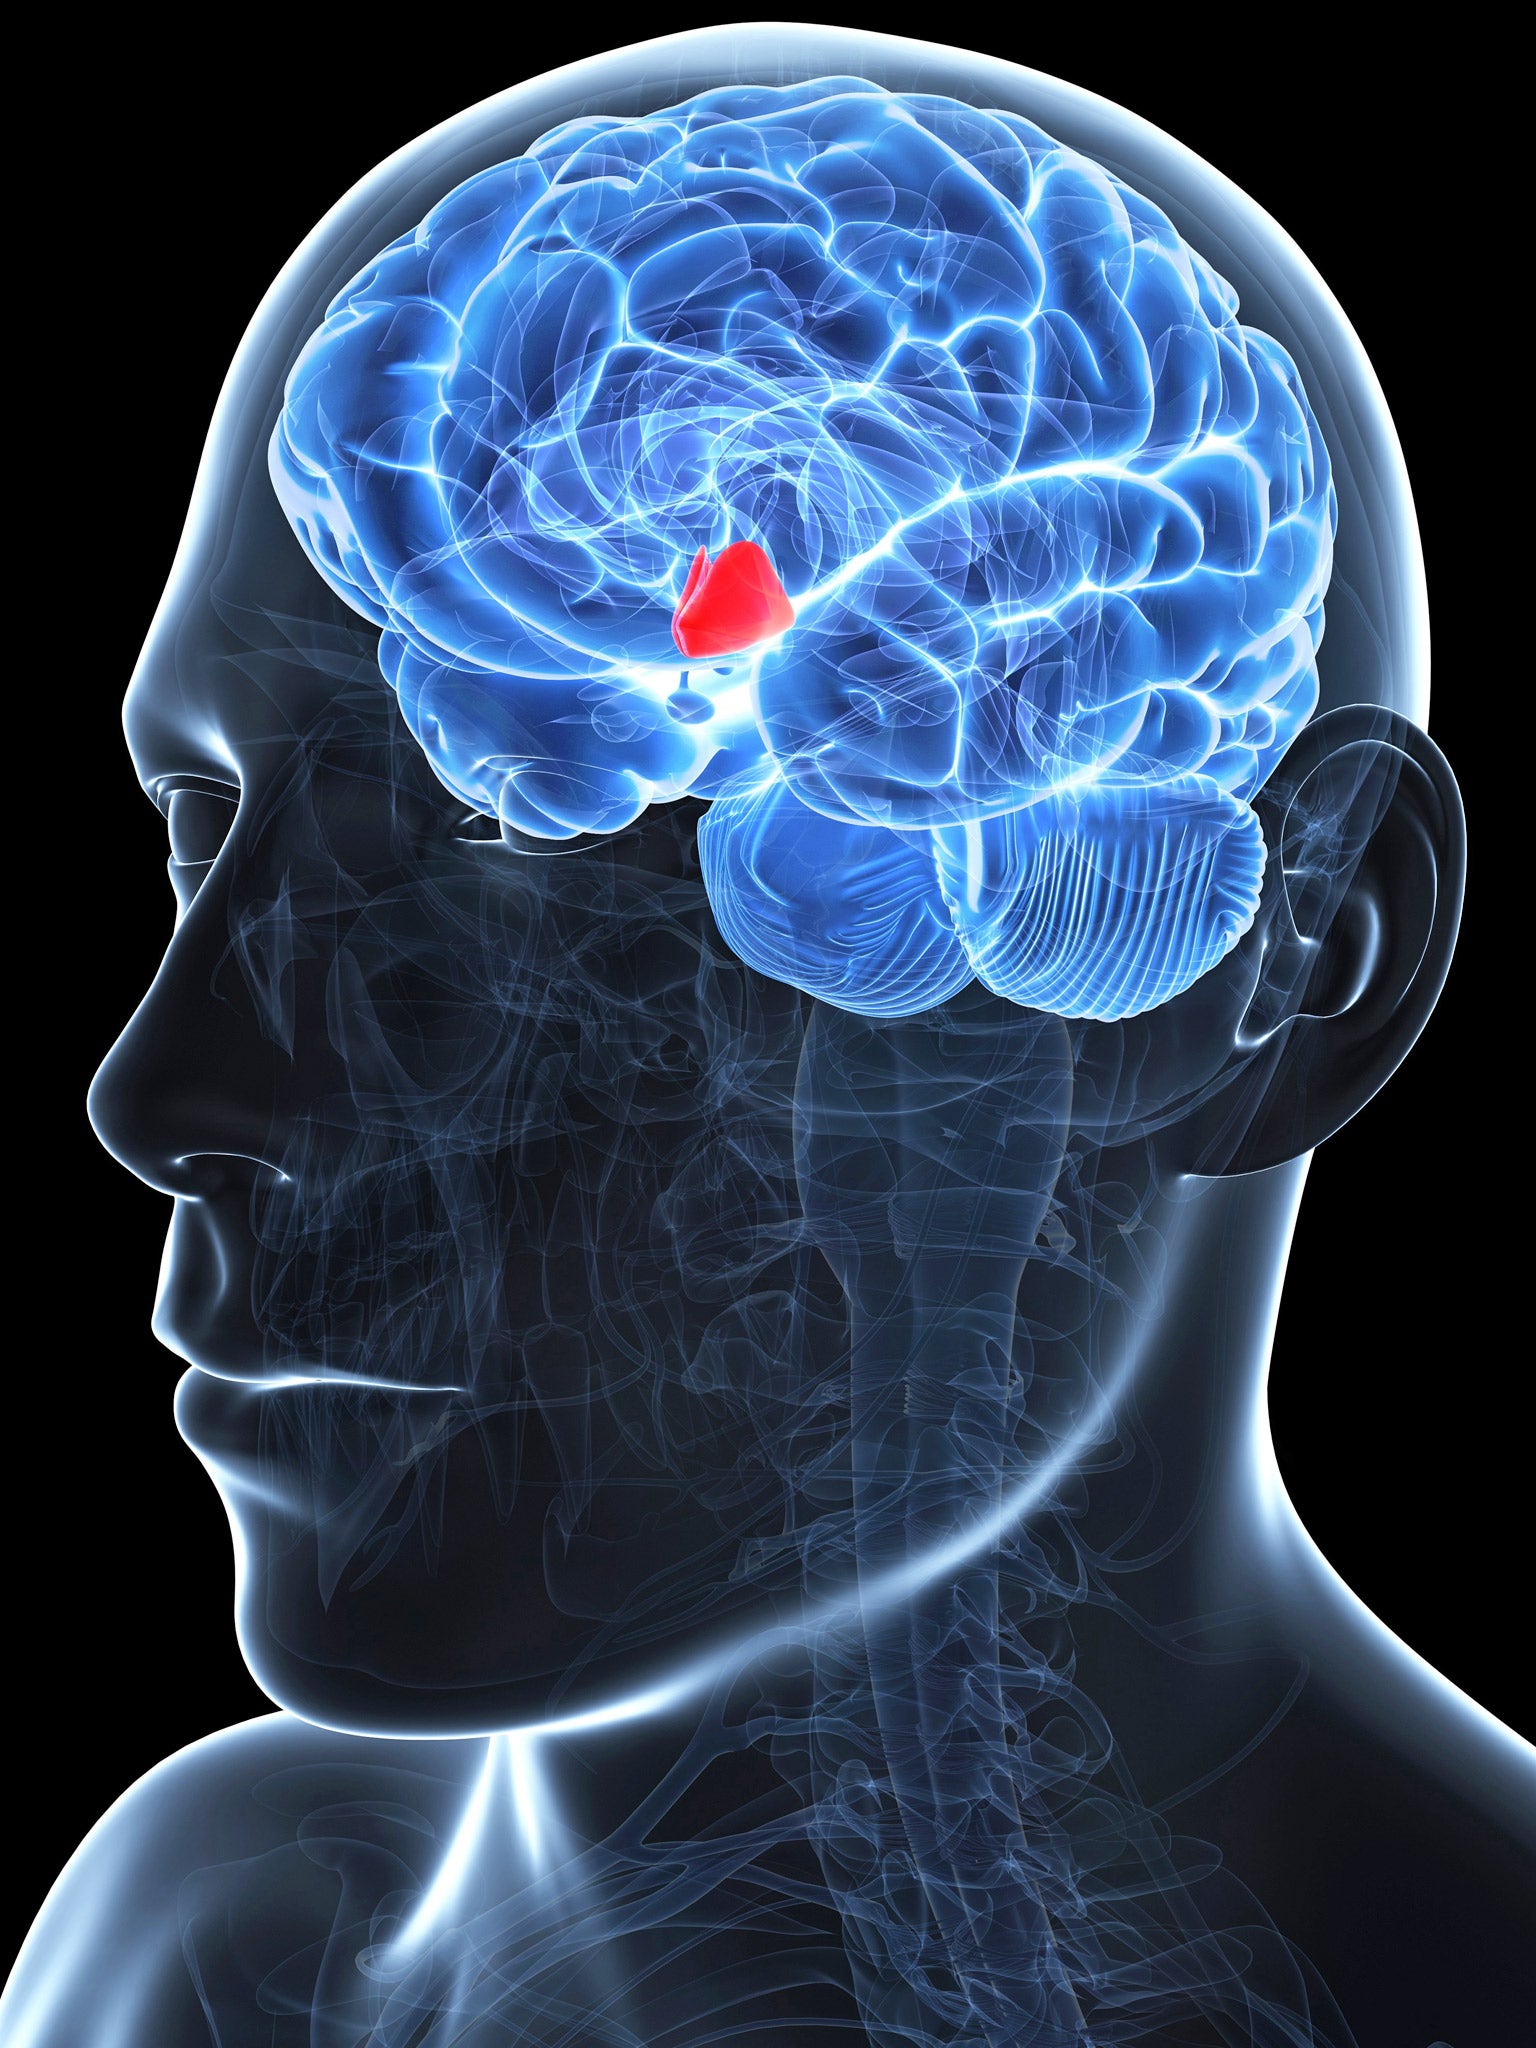 The hypothalamus, highlighted in red, is a small region of the brain involved in regulating the secretion of various hormones